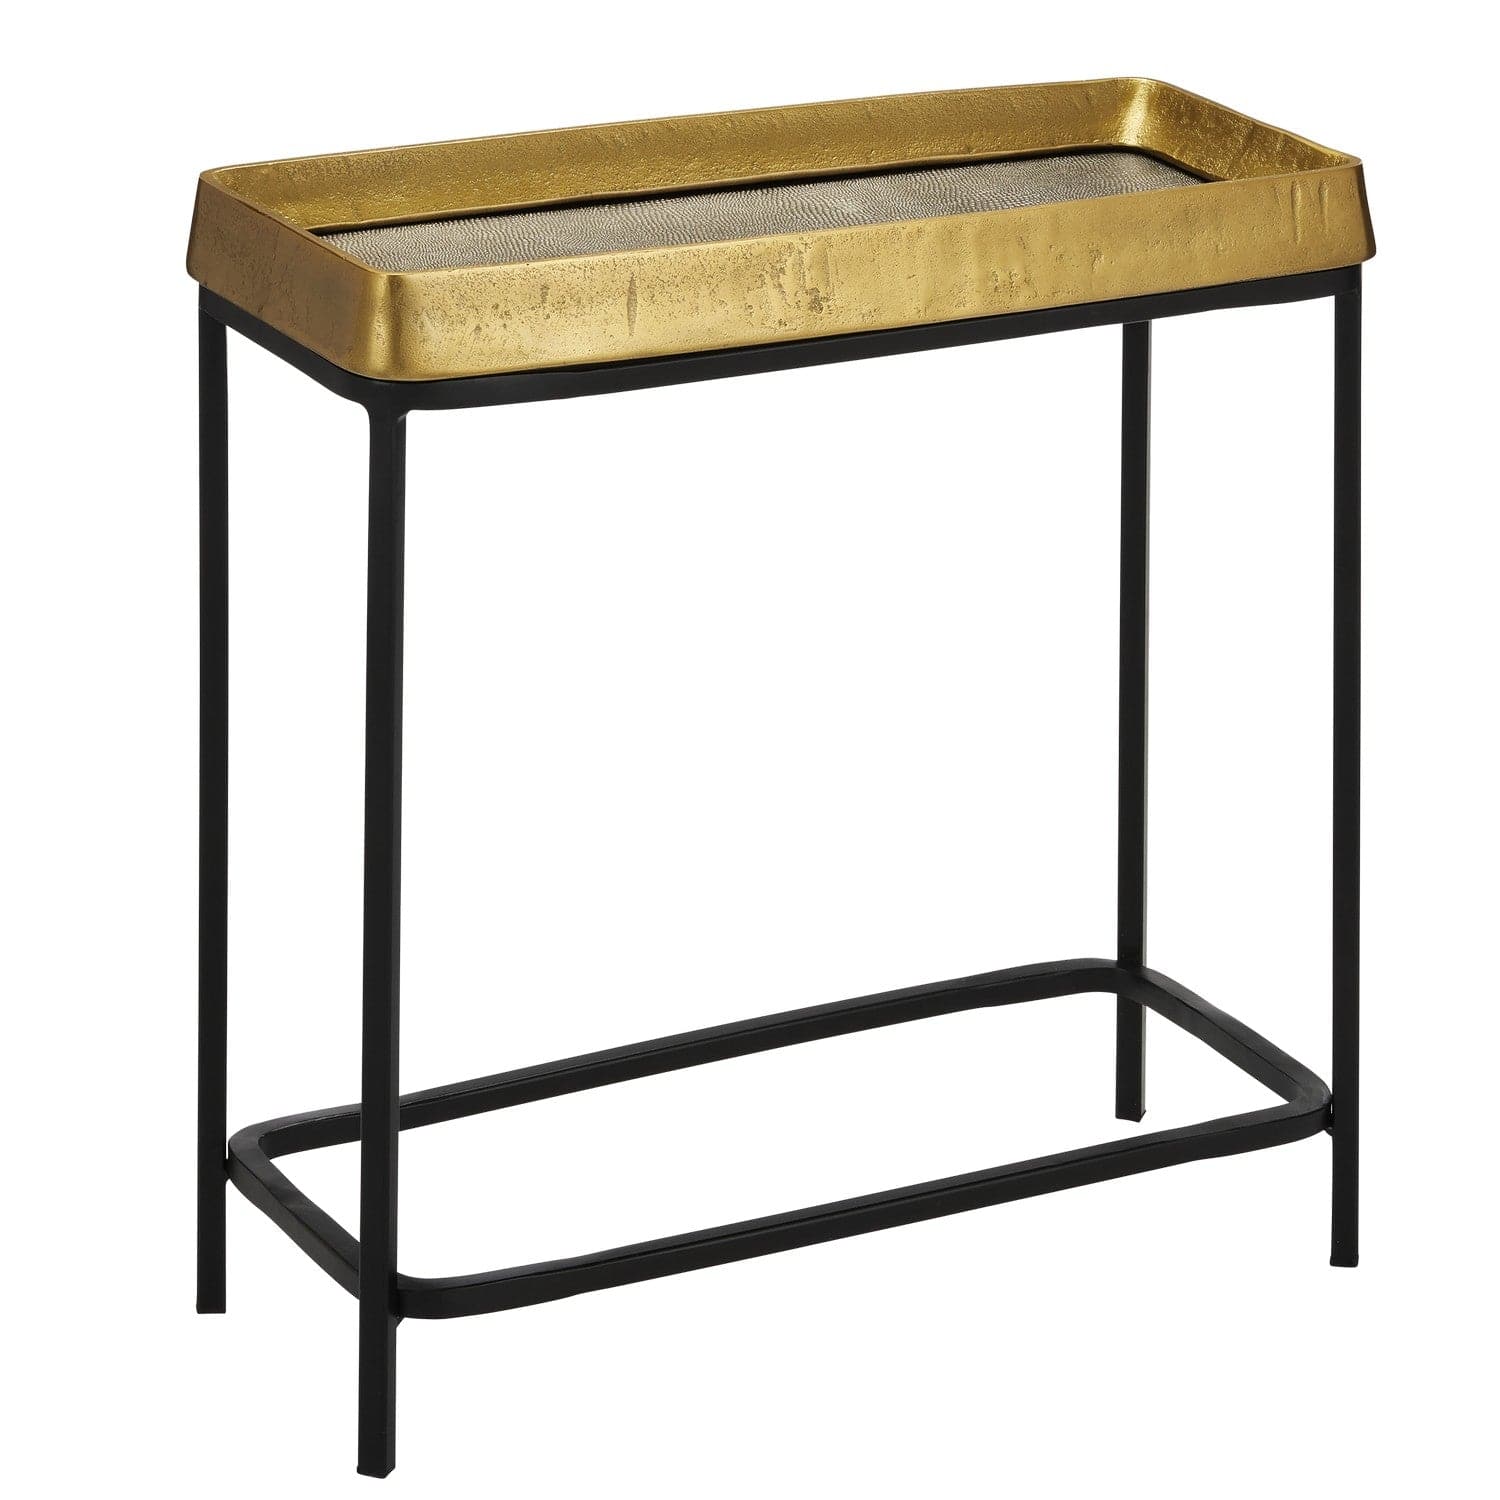 Currey and Company - 4000-0148 - Side Table - Antique Brass/Graphite/Black